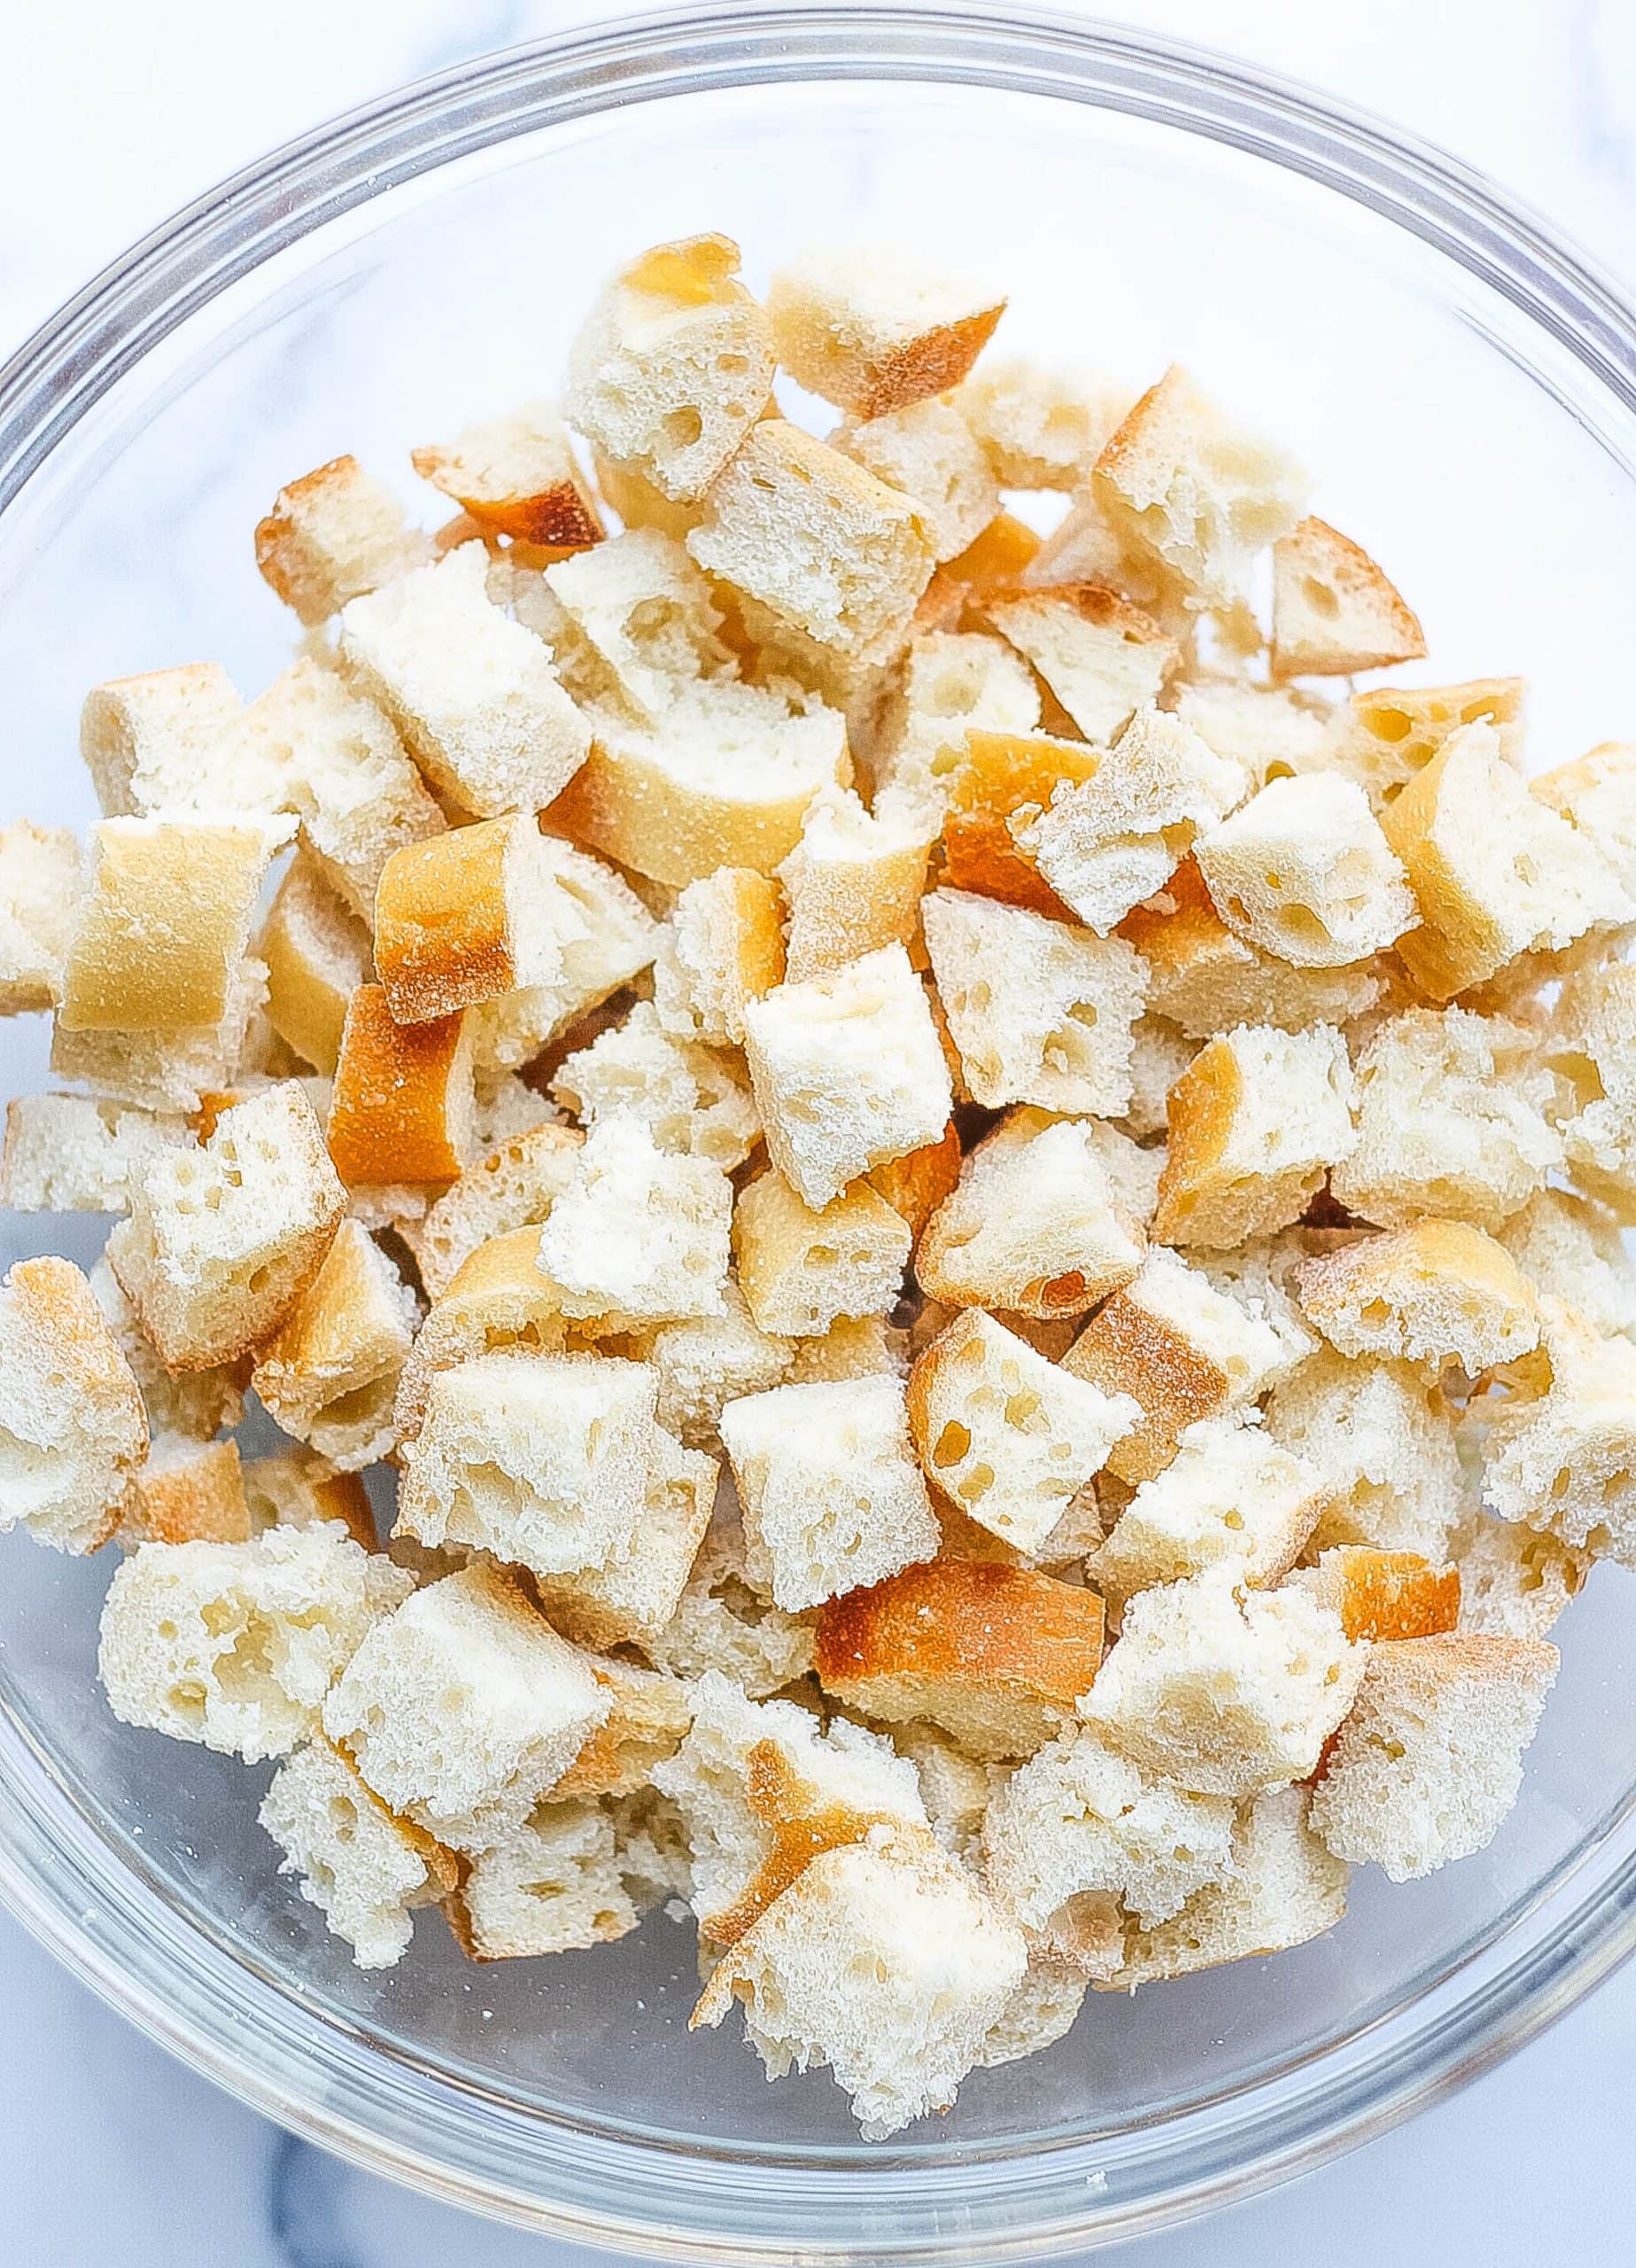 cubed bread in bowl 